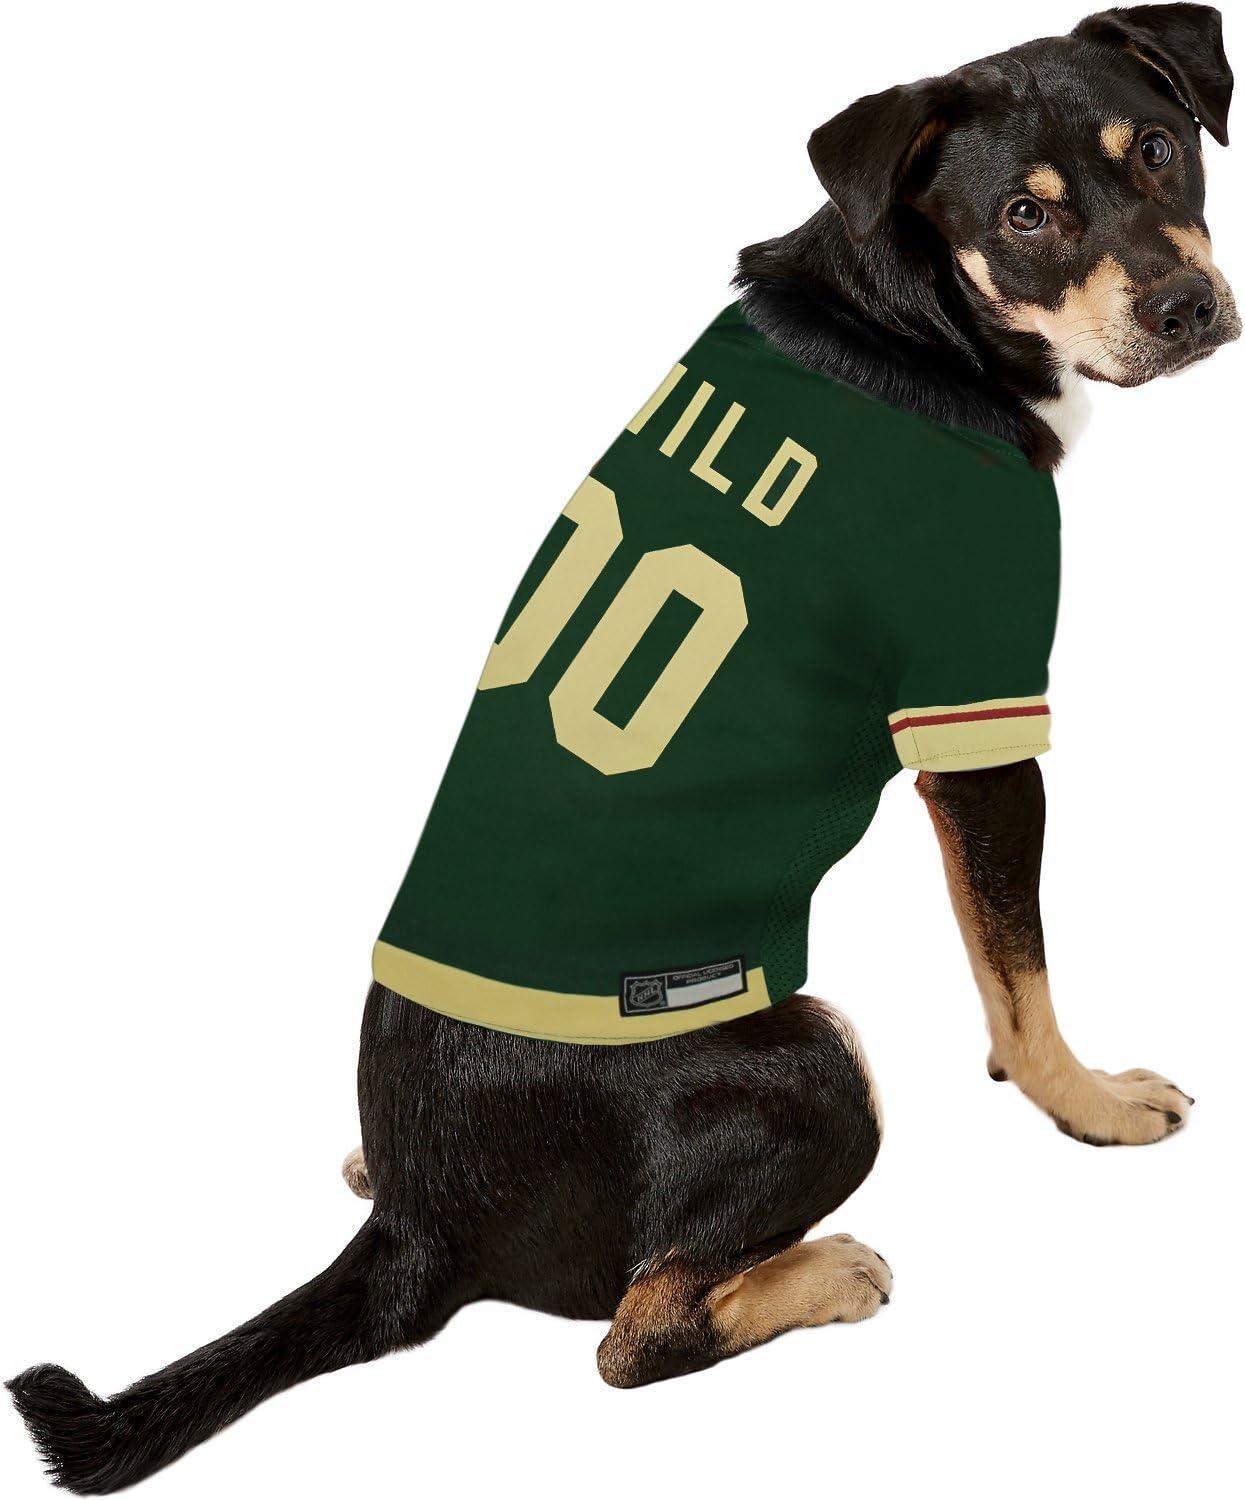  NFL Green Bay Packers Dog Jersey, Size: X-Large. Best